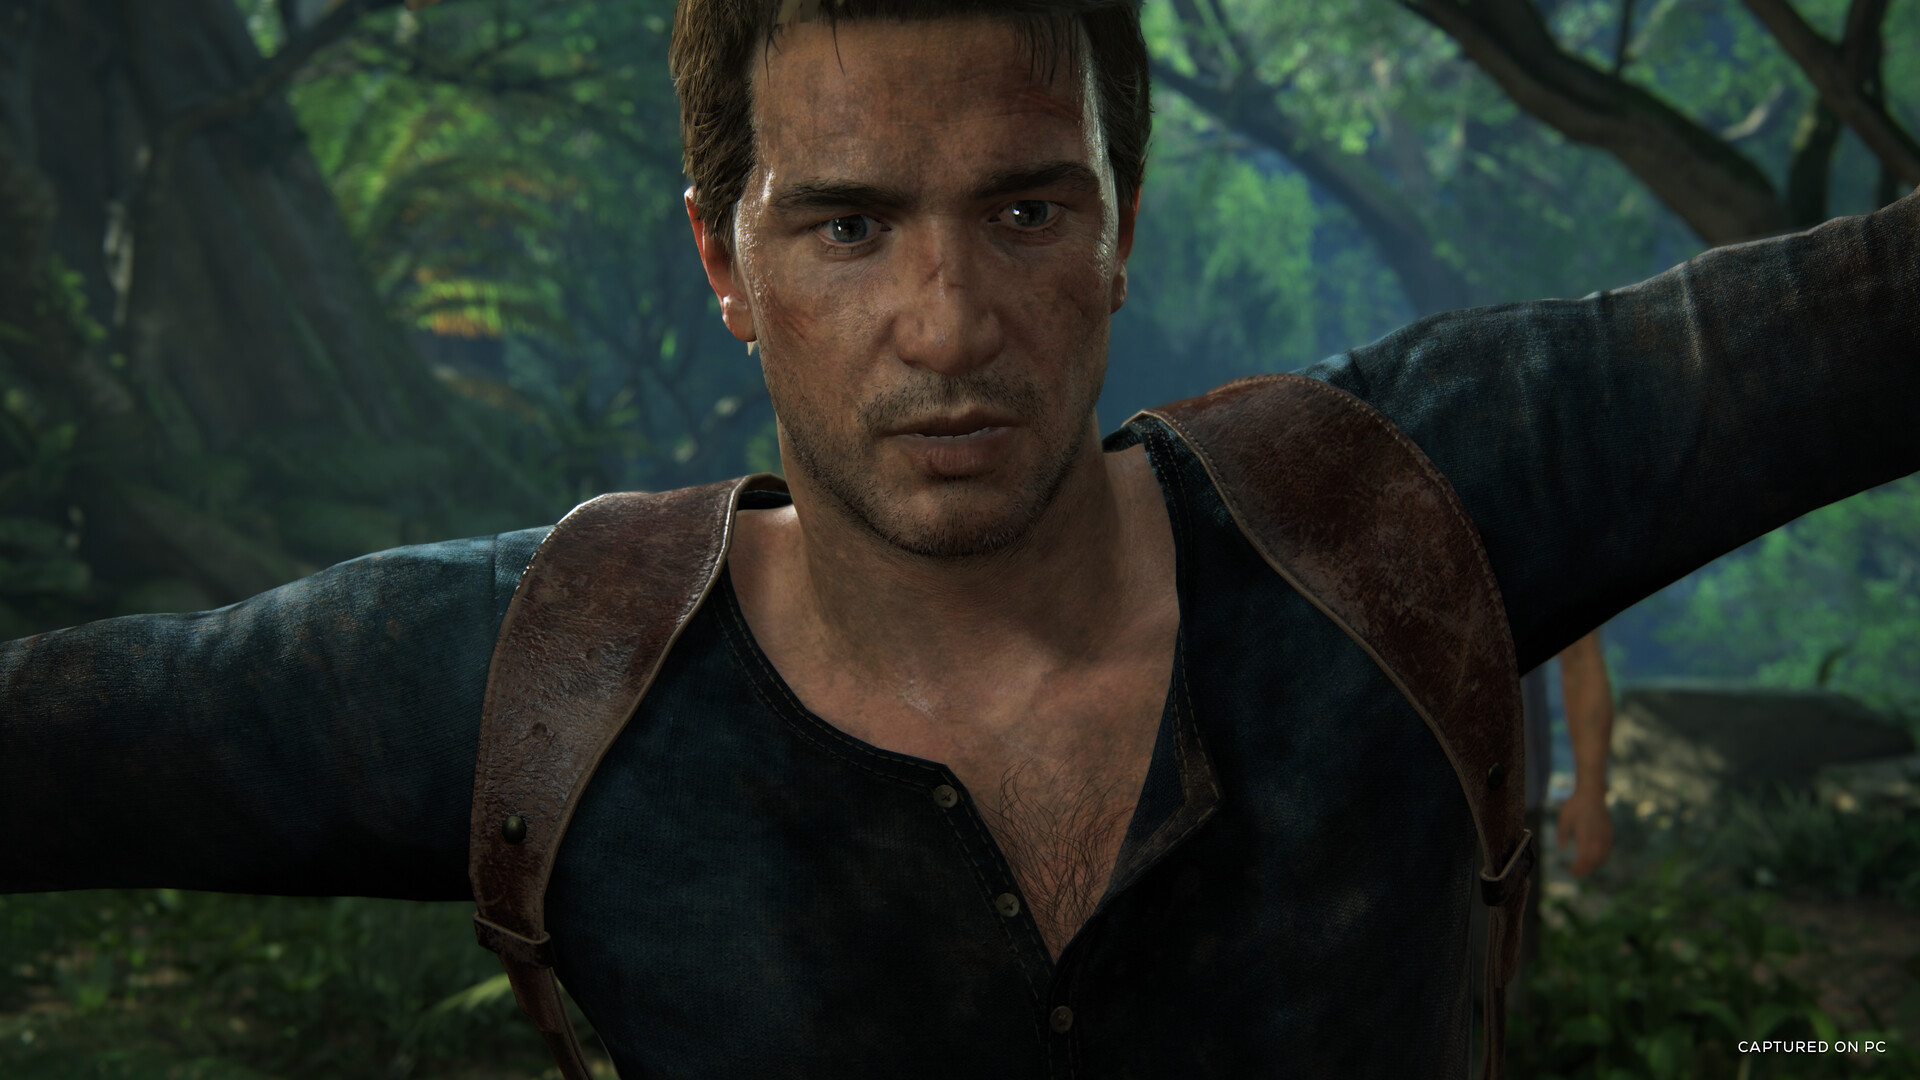 New and used Uncharted 4 Video Games for sale